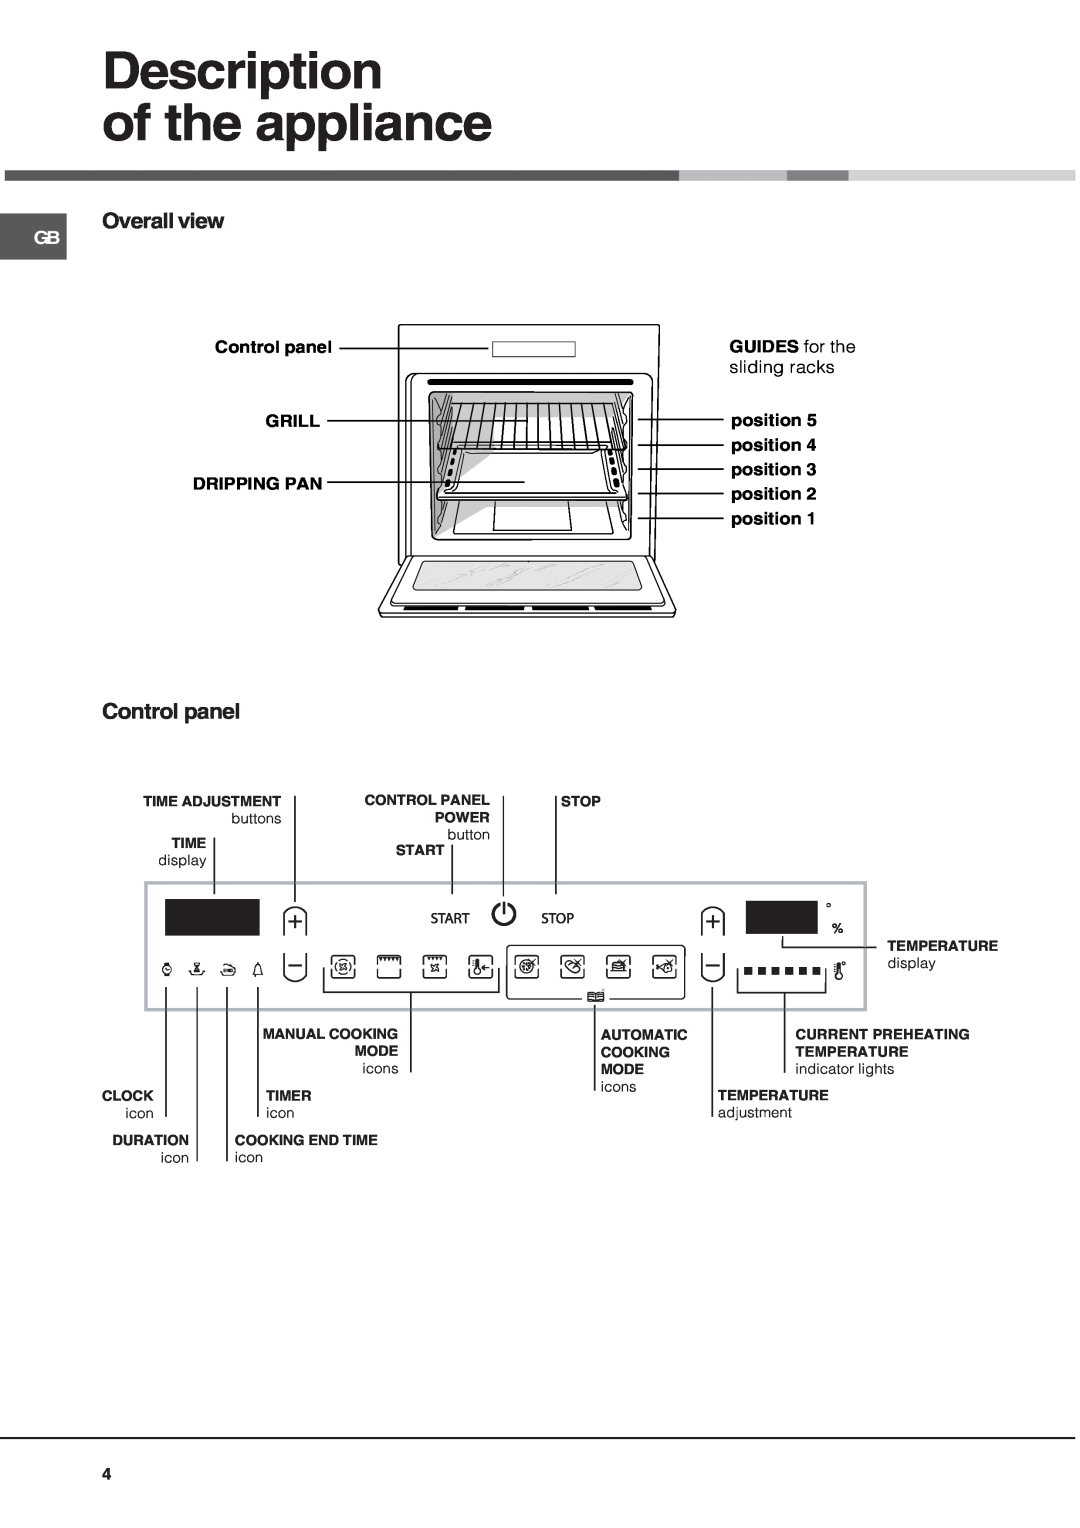 Hotpoint SE1022X Description of the appliance, Control panel GRILL DRIPPING PAN, GUIDES for the sliding racks, buttons 